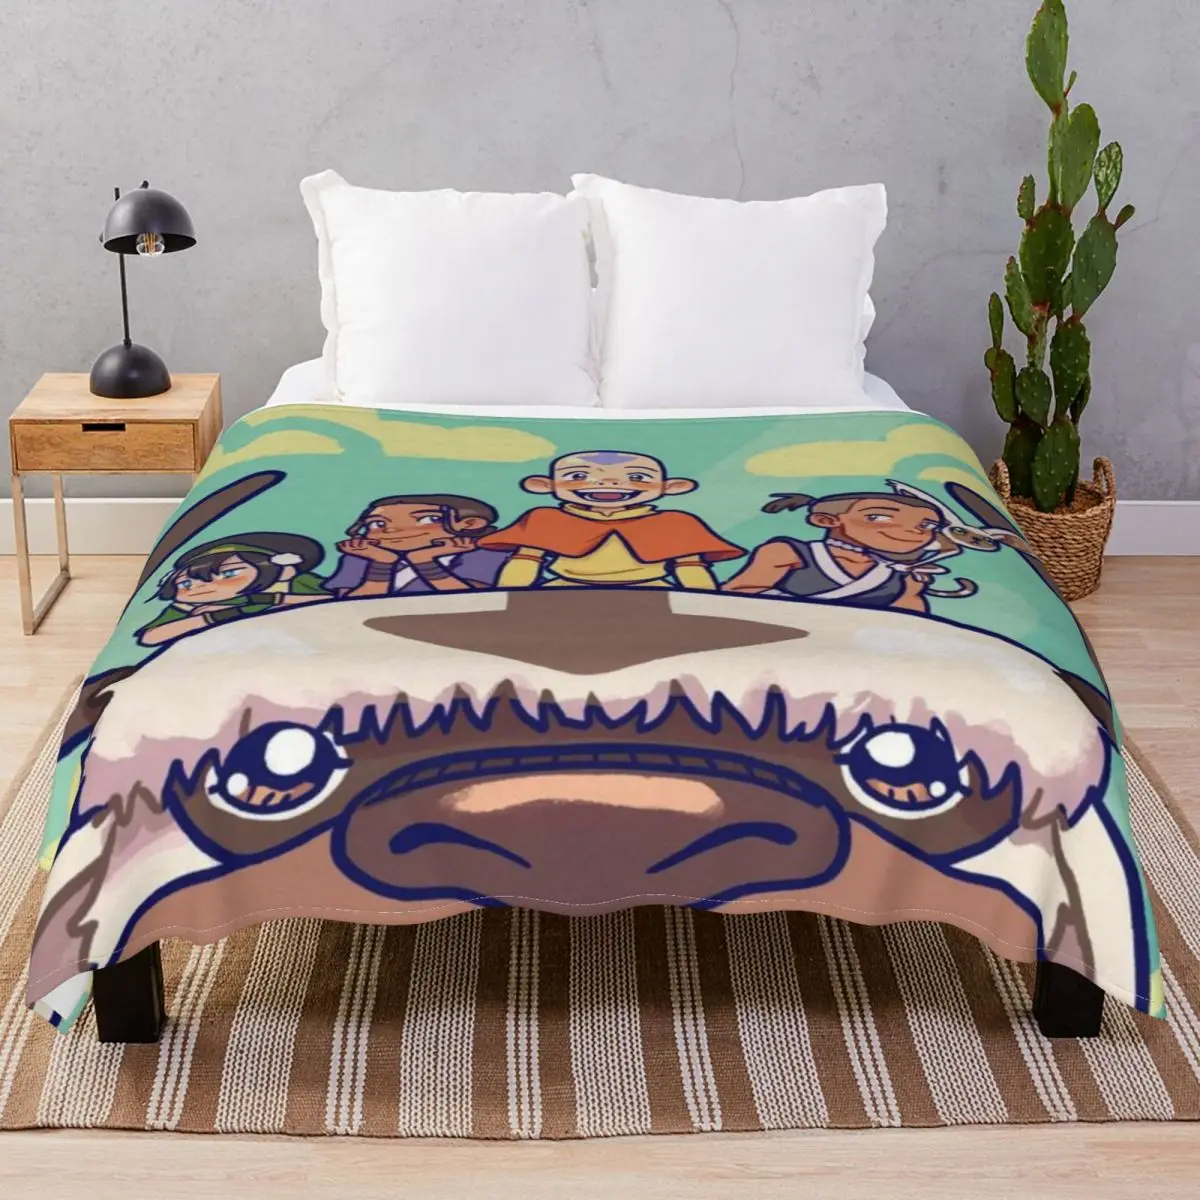 Avatar And Appa Blanket Coral Fleece Summer Multifunction Throw Blankets for Bed Sofa Camp Office